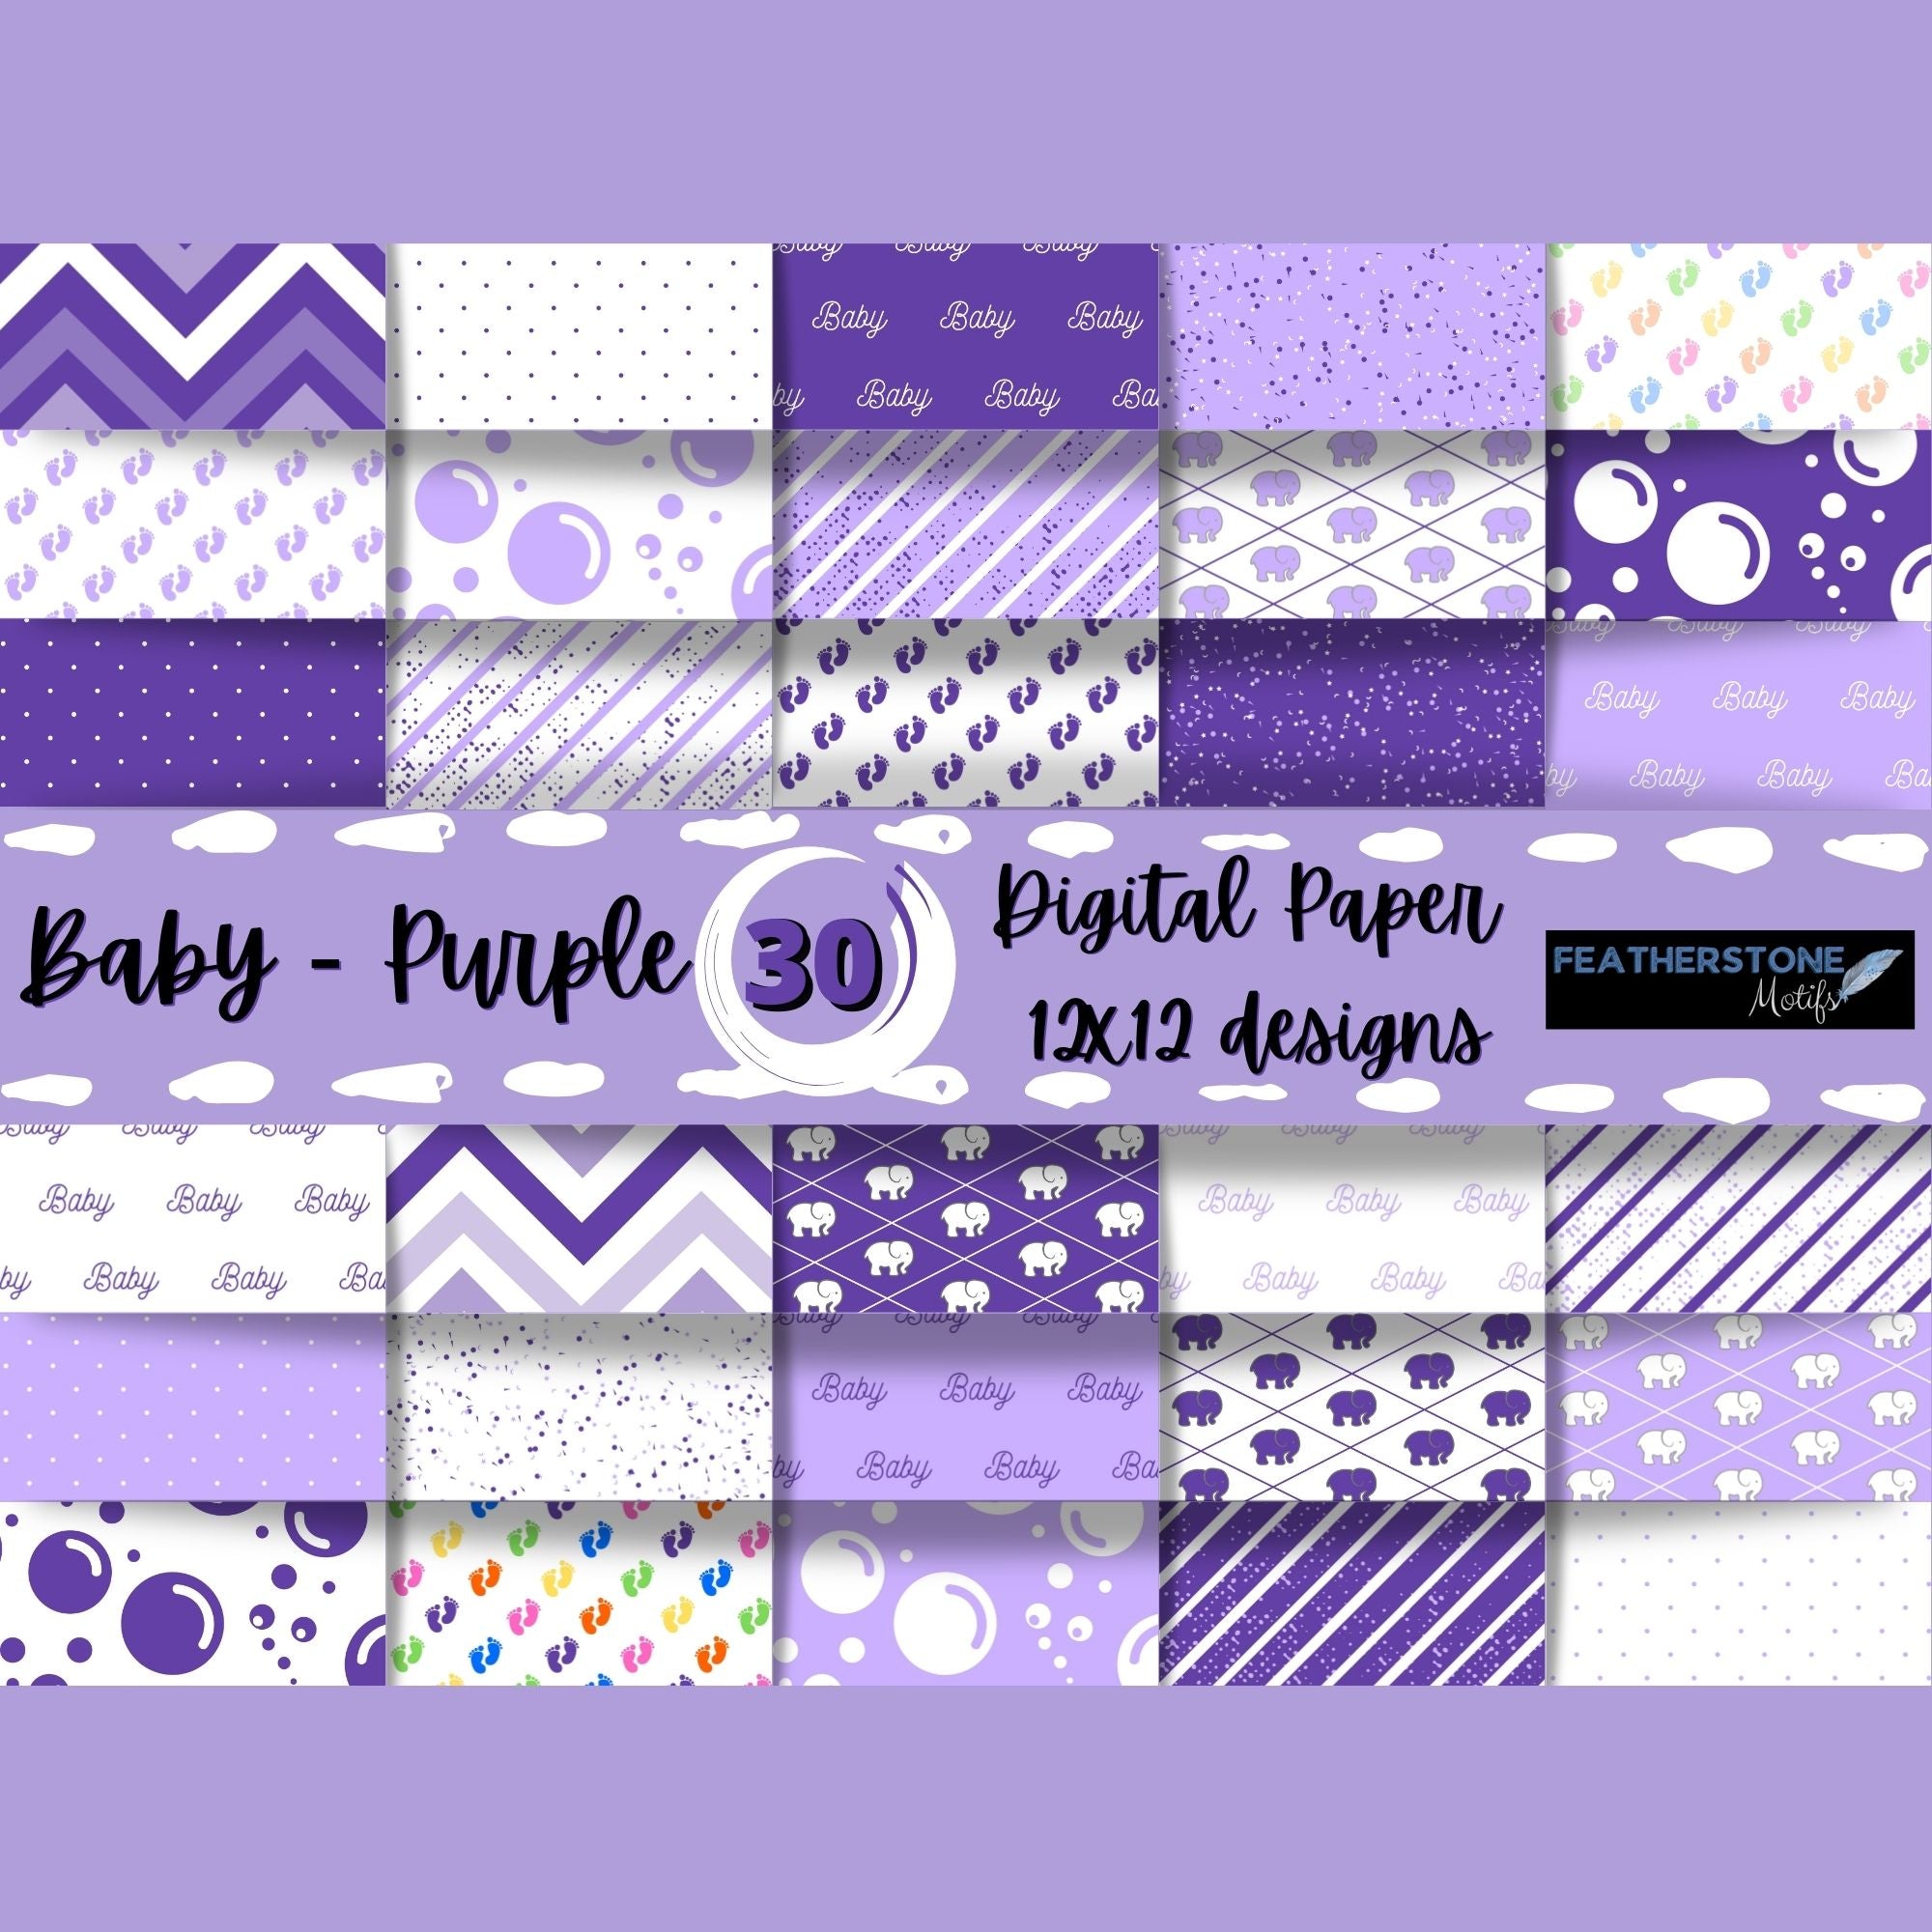 Scrapbookers, this is what you've been looking for! This purple themed baby bundle has 30 unique images that can be printed or used as digital backgrounds.